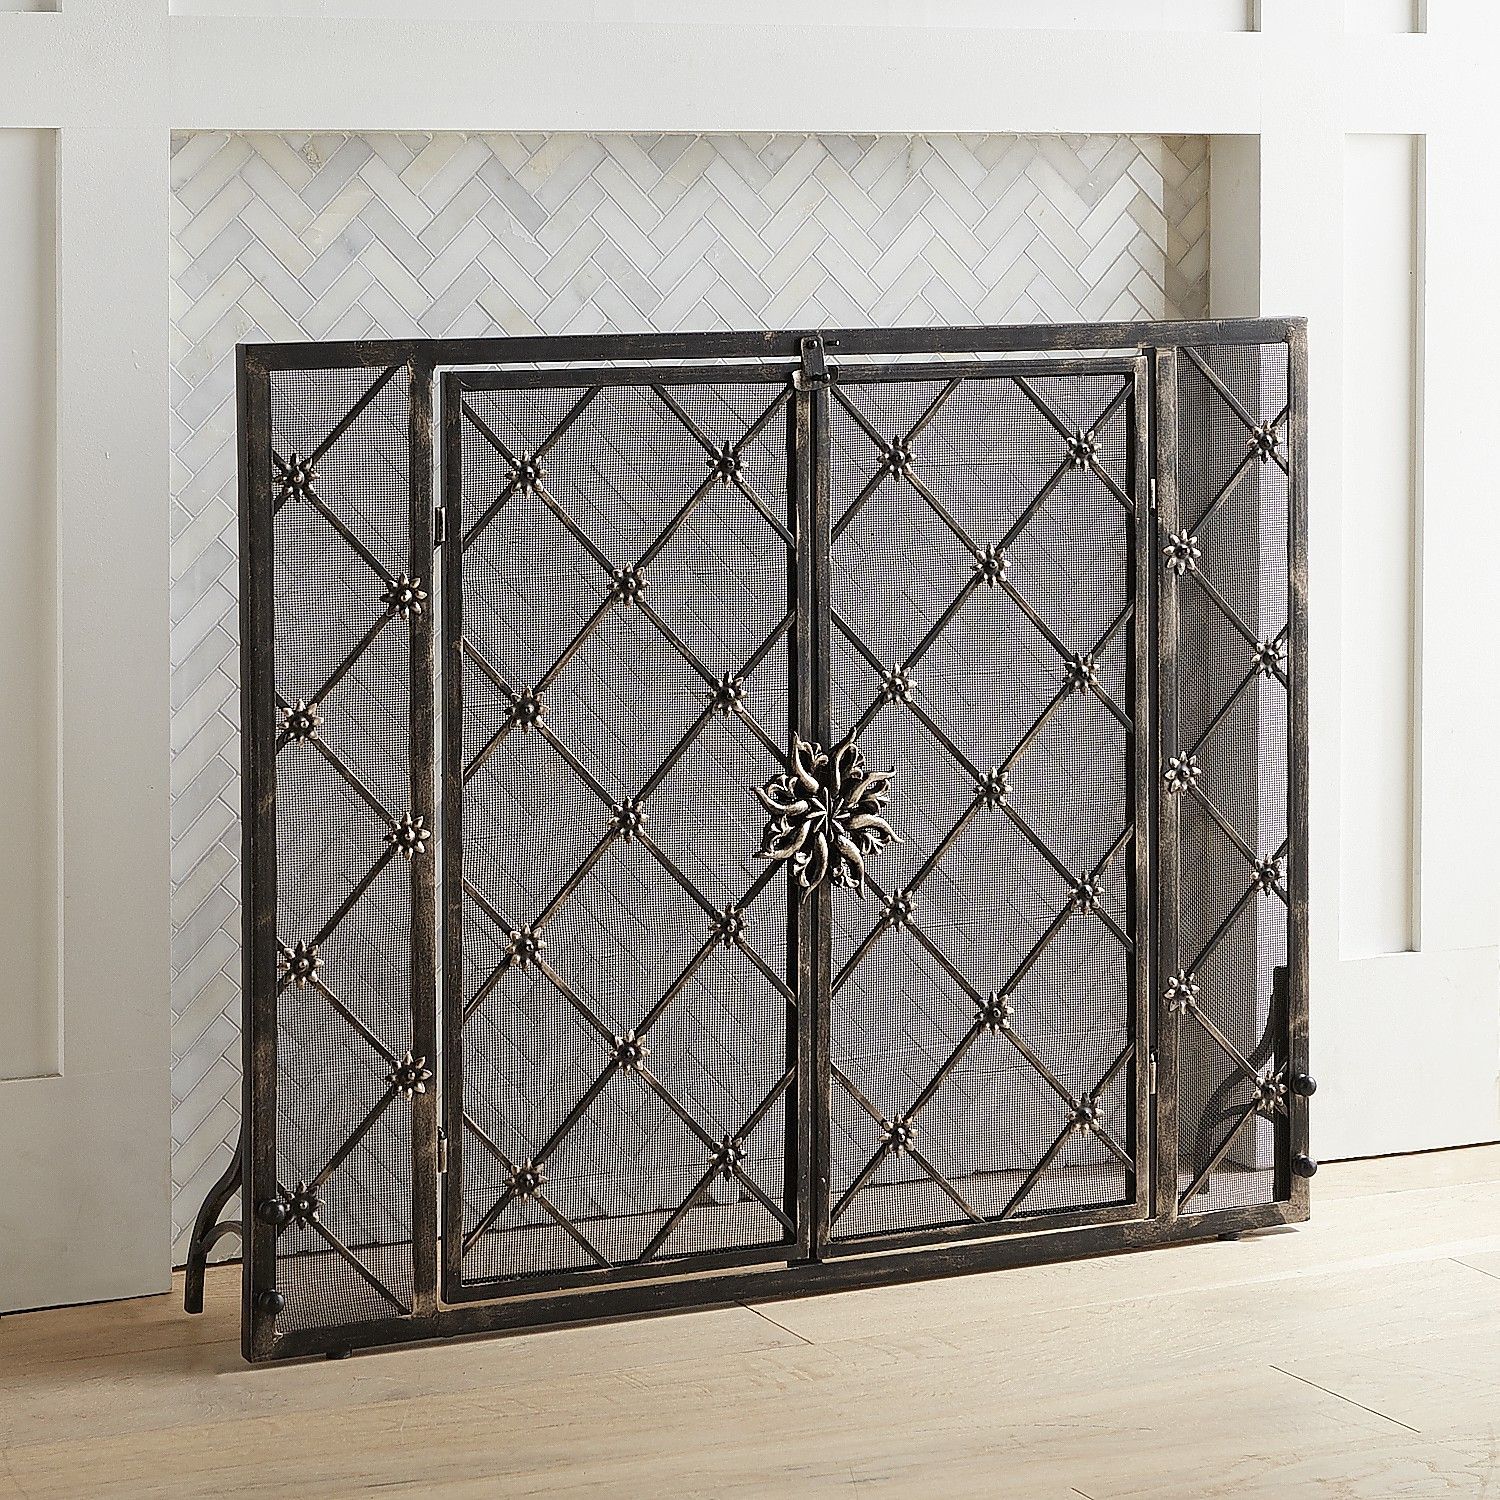 Single Fireplace Screen New Junction Fireplace Screen In 2019 Products